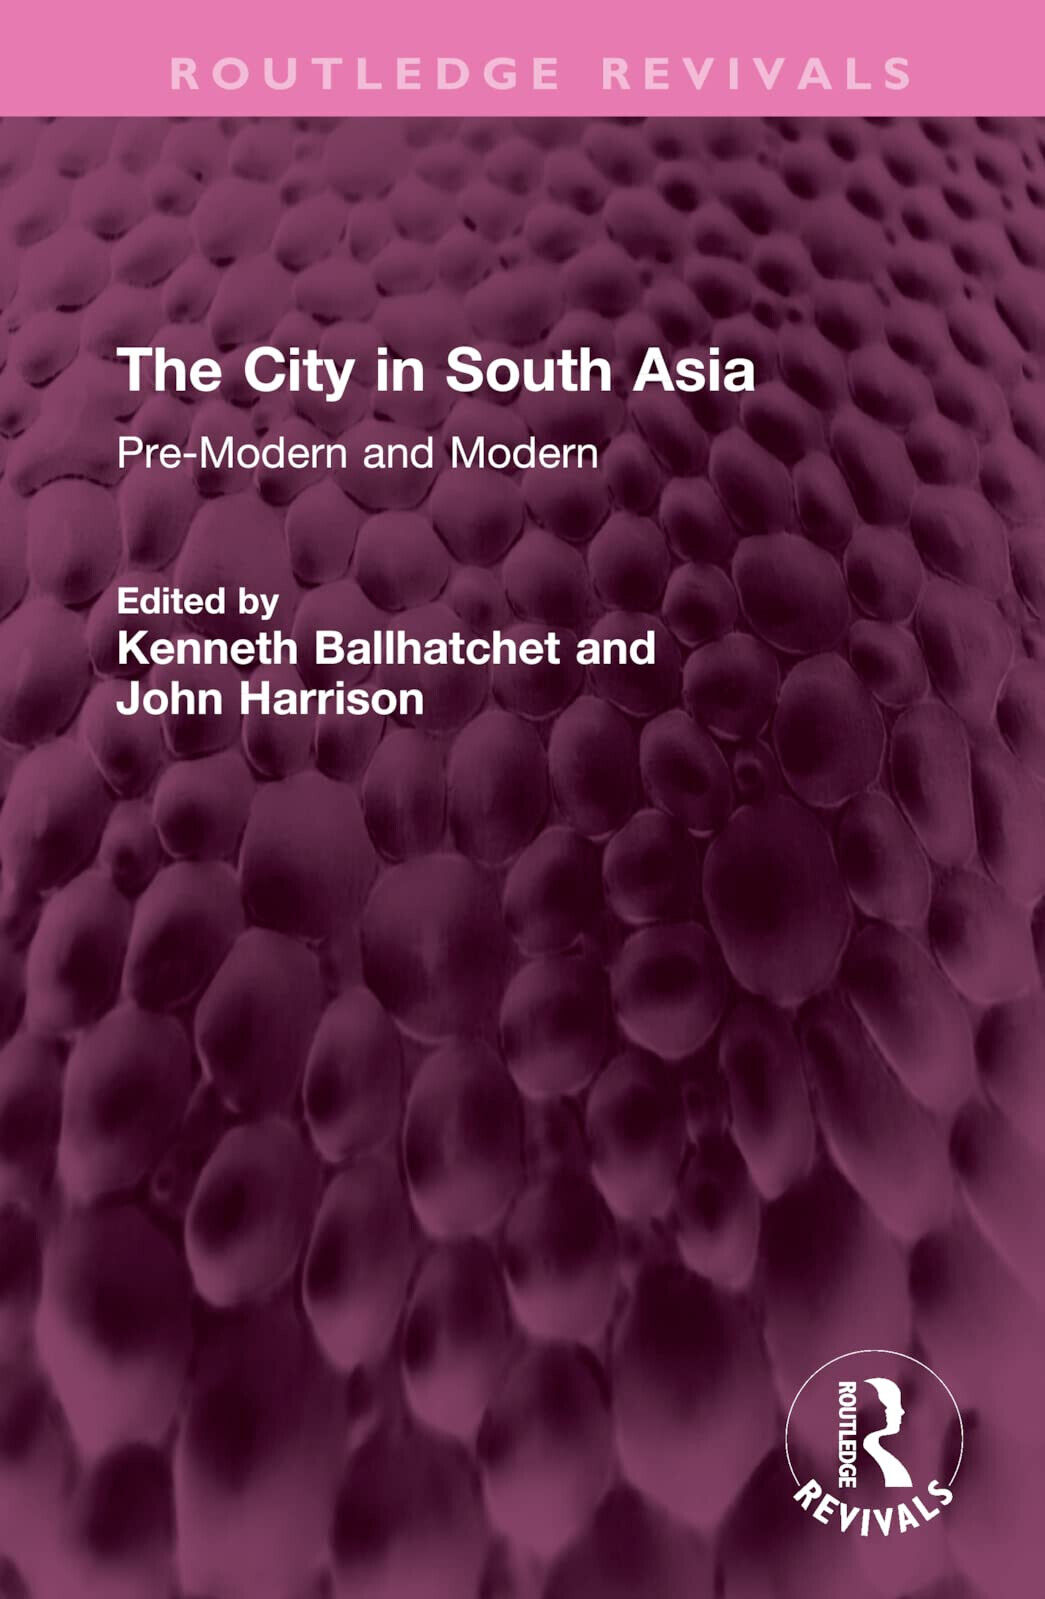 The City In South Asia - Kenneth Ballhatchet - Routledge, 2022